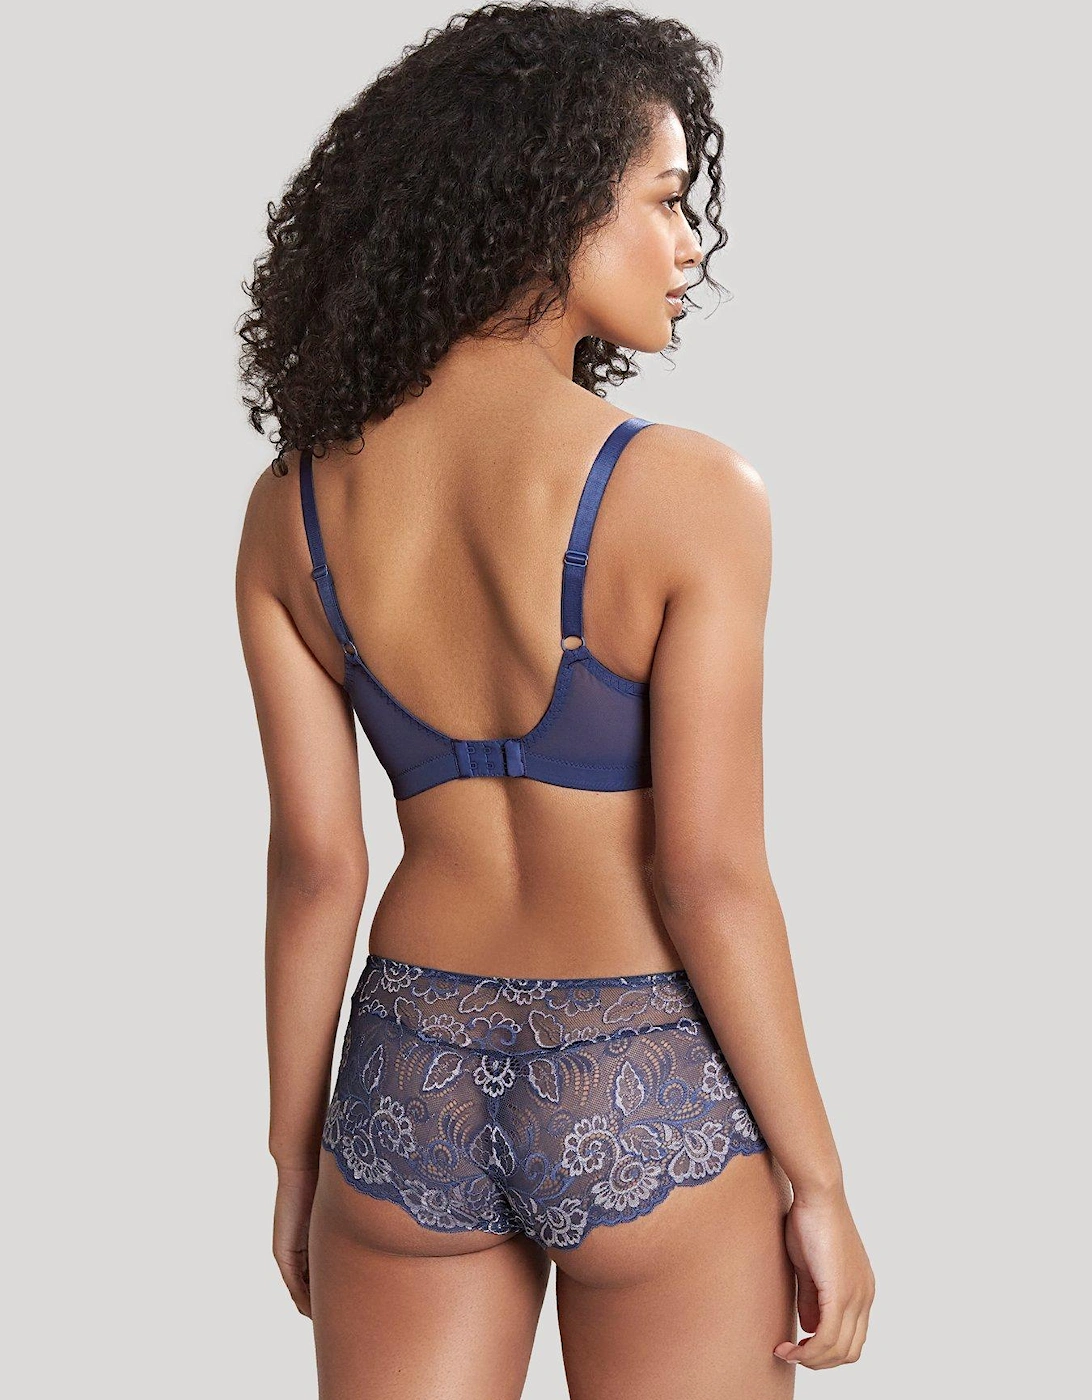 Andorra Non Wired Full Cup Bra - Blue